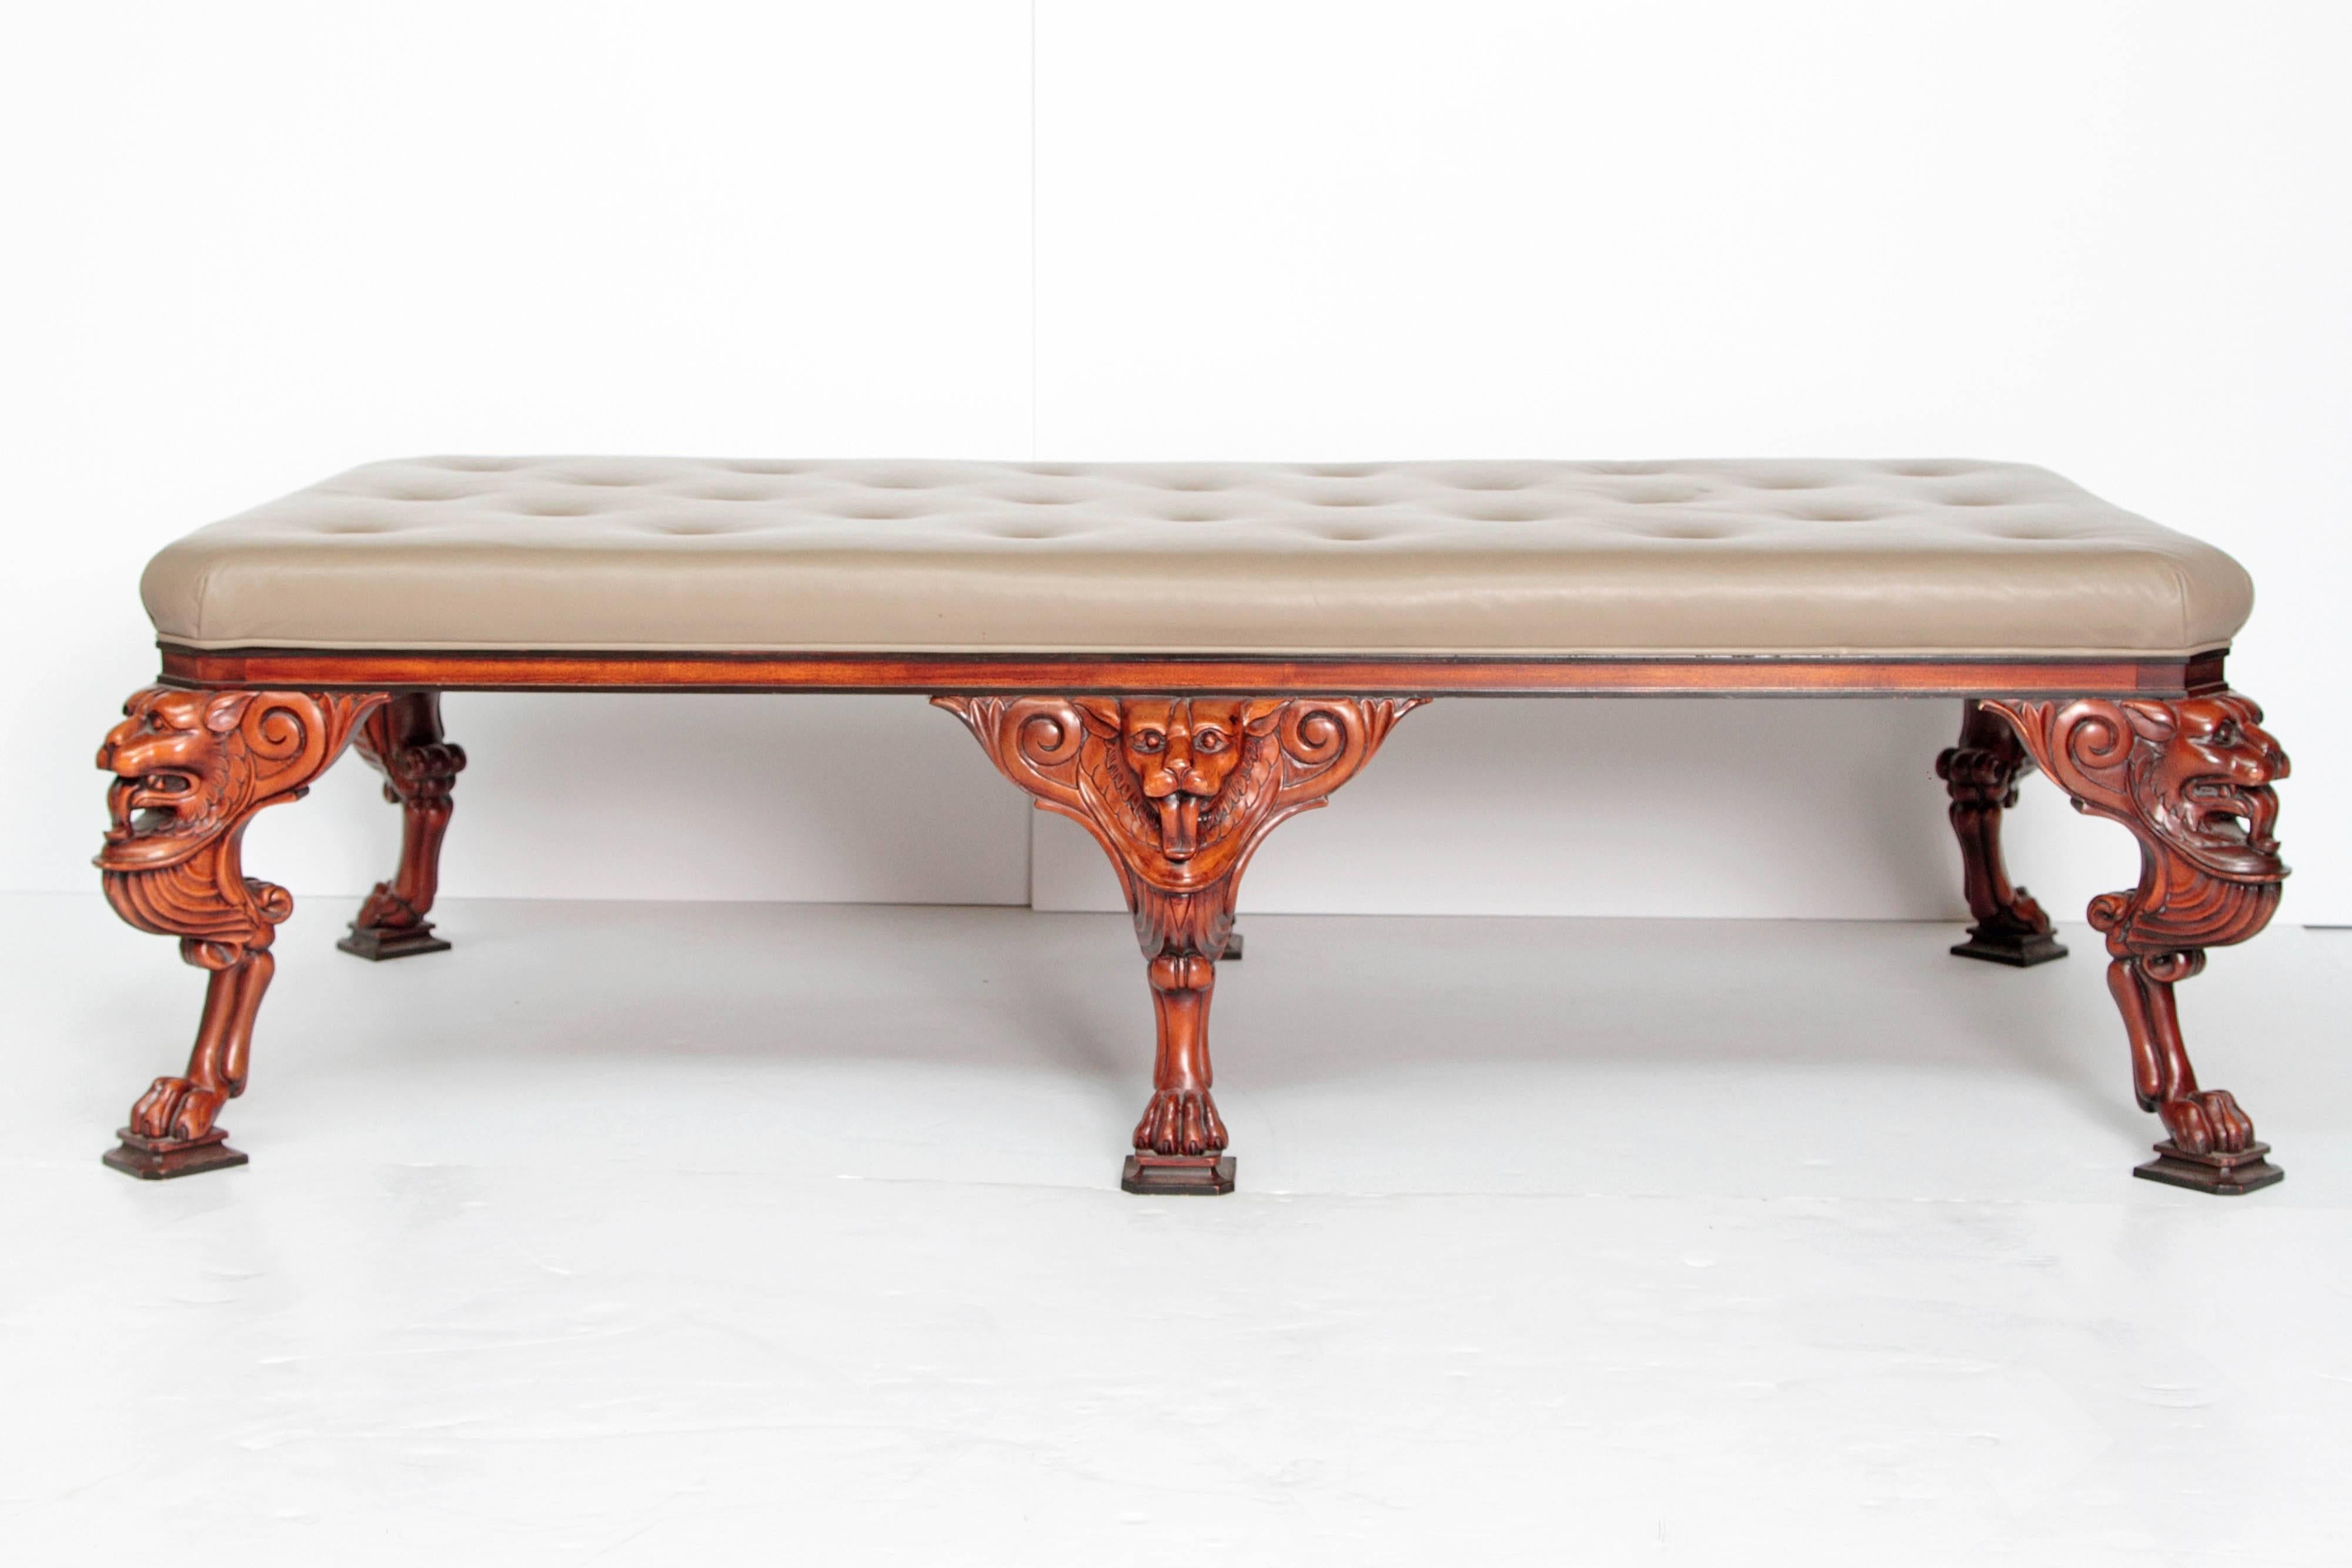 A vintage large George II-style upholstered leather button tufted bench / coffee table by Baker Furniture, highly decorative well carved lions heads at top of legs and paw feet at bottom.